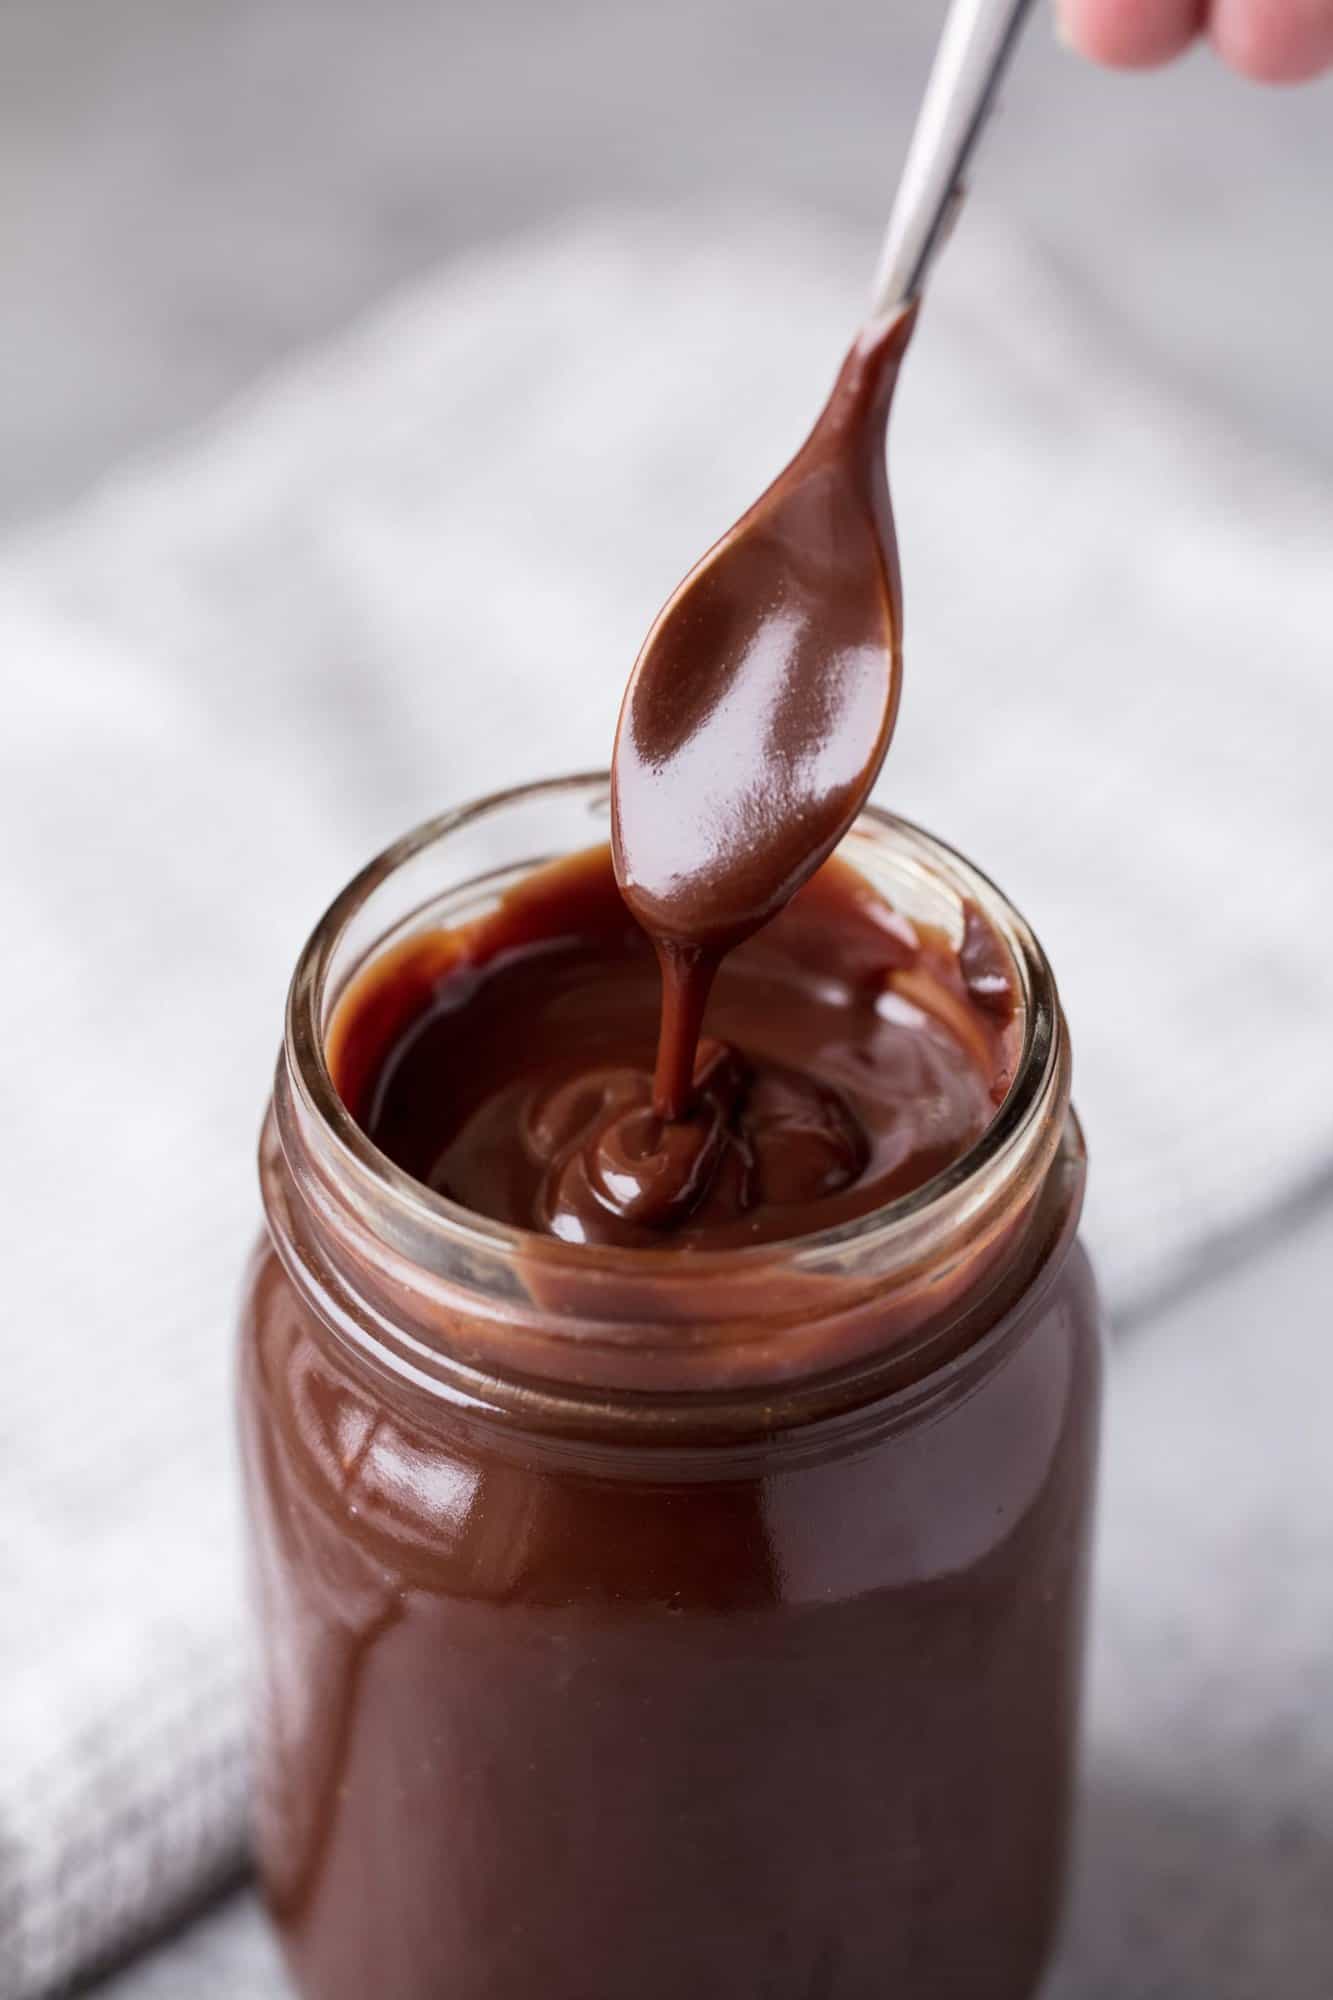 Thick, fudgy, gooey and smooth....this really is The Best Hot Fudge Sauce. It's super easy to make your own homemade hot fudge sauce at home and it tastes so much better than the store bought stuff.